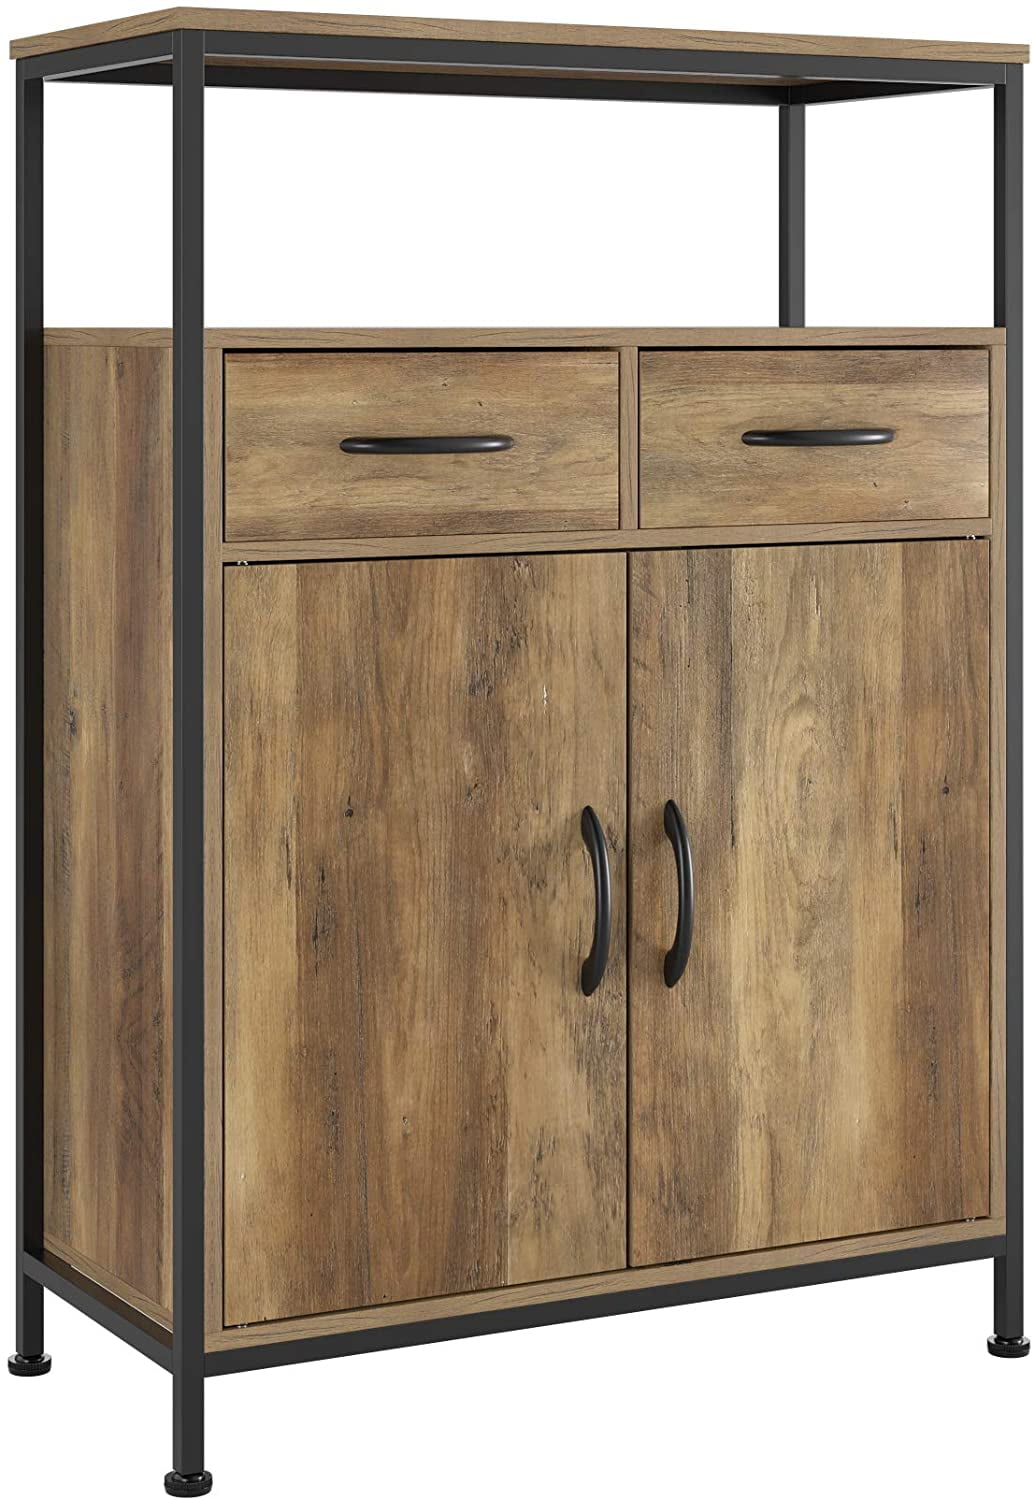 Homecho Industrial Storage Cabinet, Office Storage Cabinet With Doors And Drawers